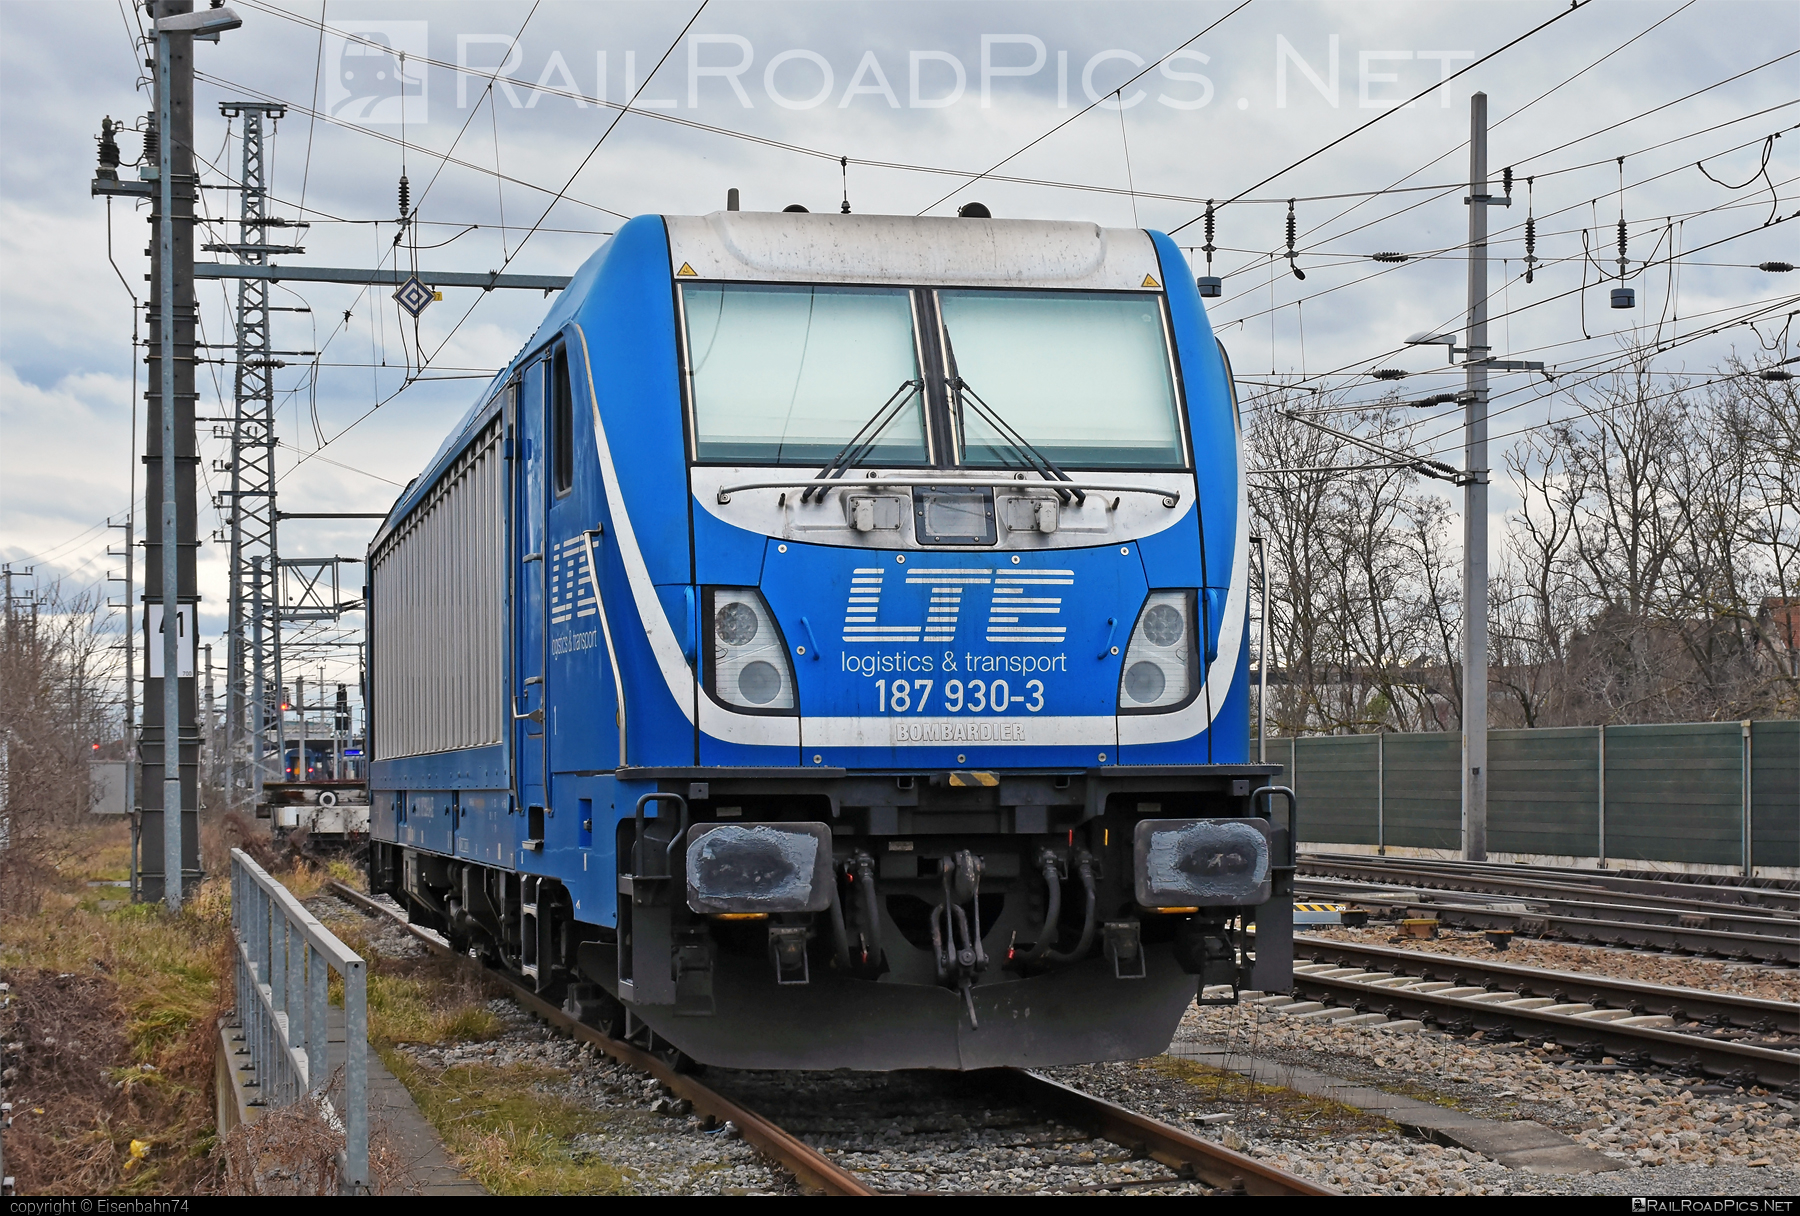 Bombardier TRAXX F160 AC3 - 187 930-3 operated by LTE Logistik und Transport GmbH #bombardier #bombardiertraxx #lte #ltelogistikundtransport #ltelogistikundtransportgmbh #traxx #traxxf160 #traxxf160ac #traxxf160ac3